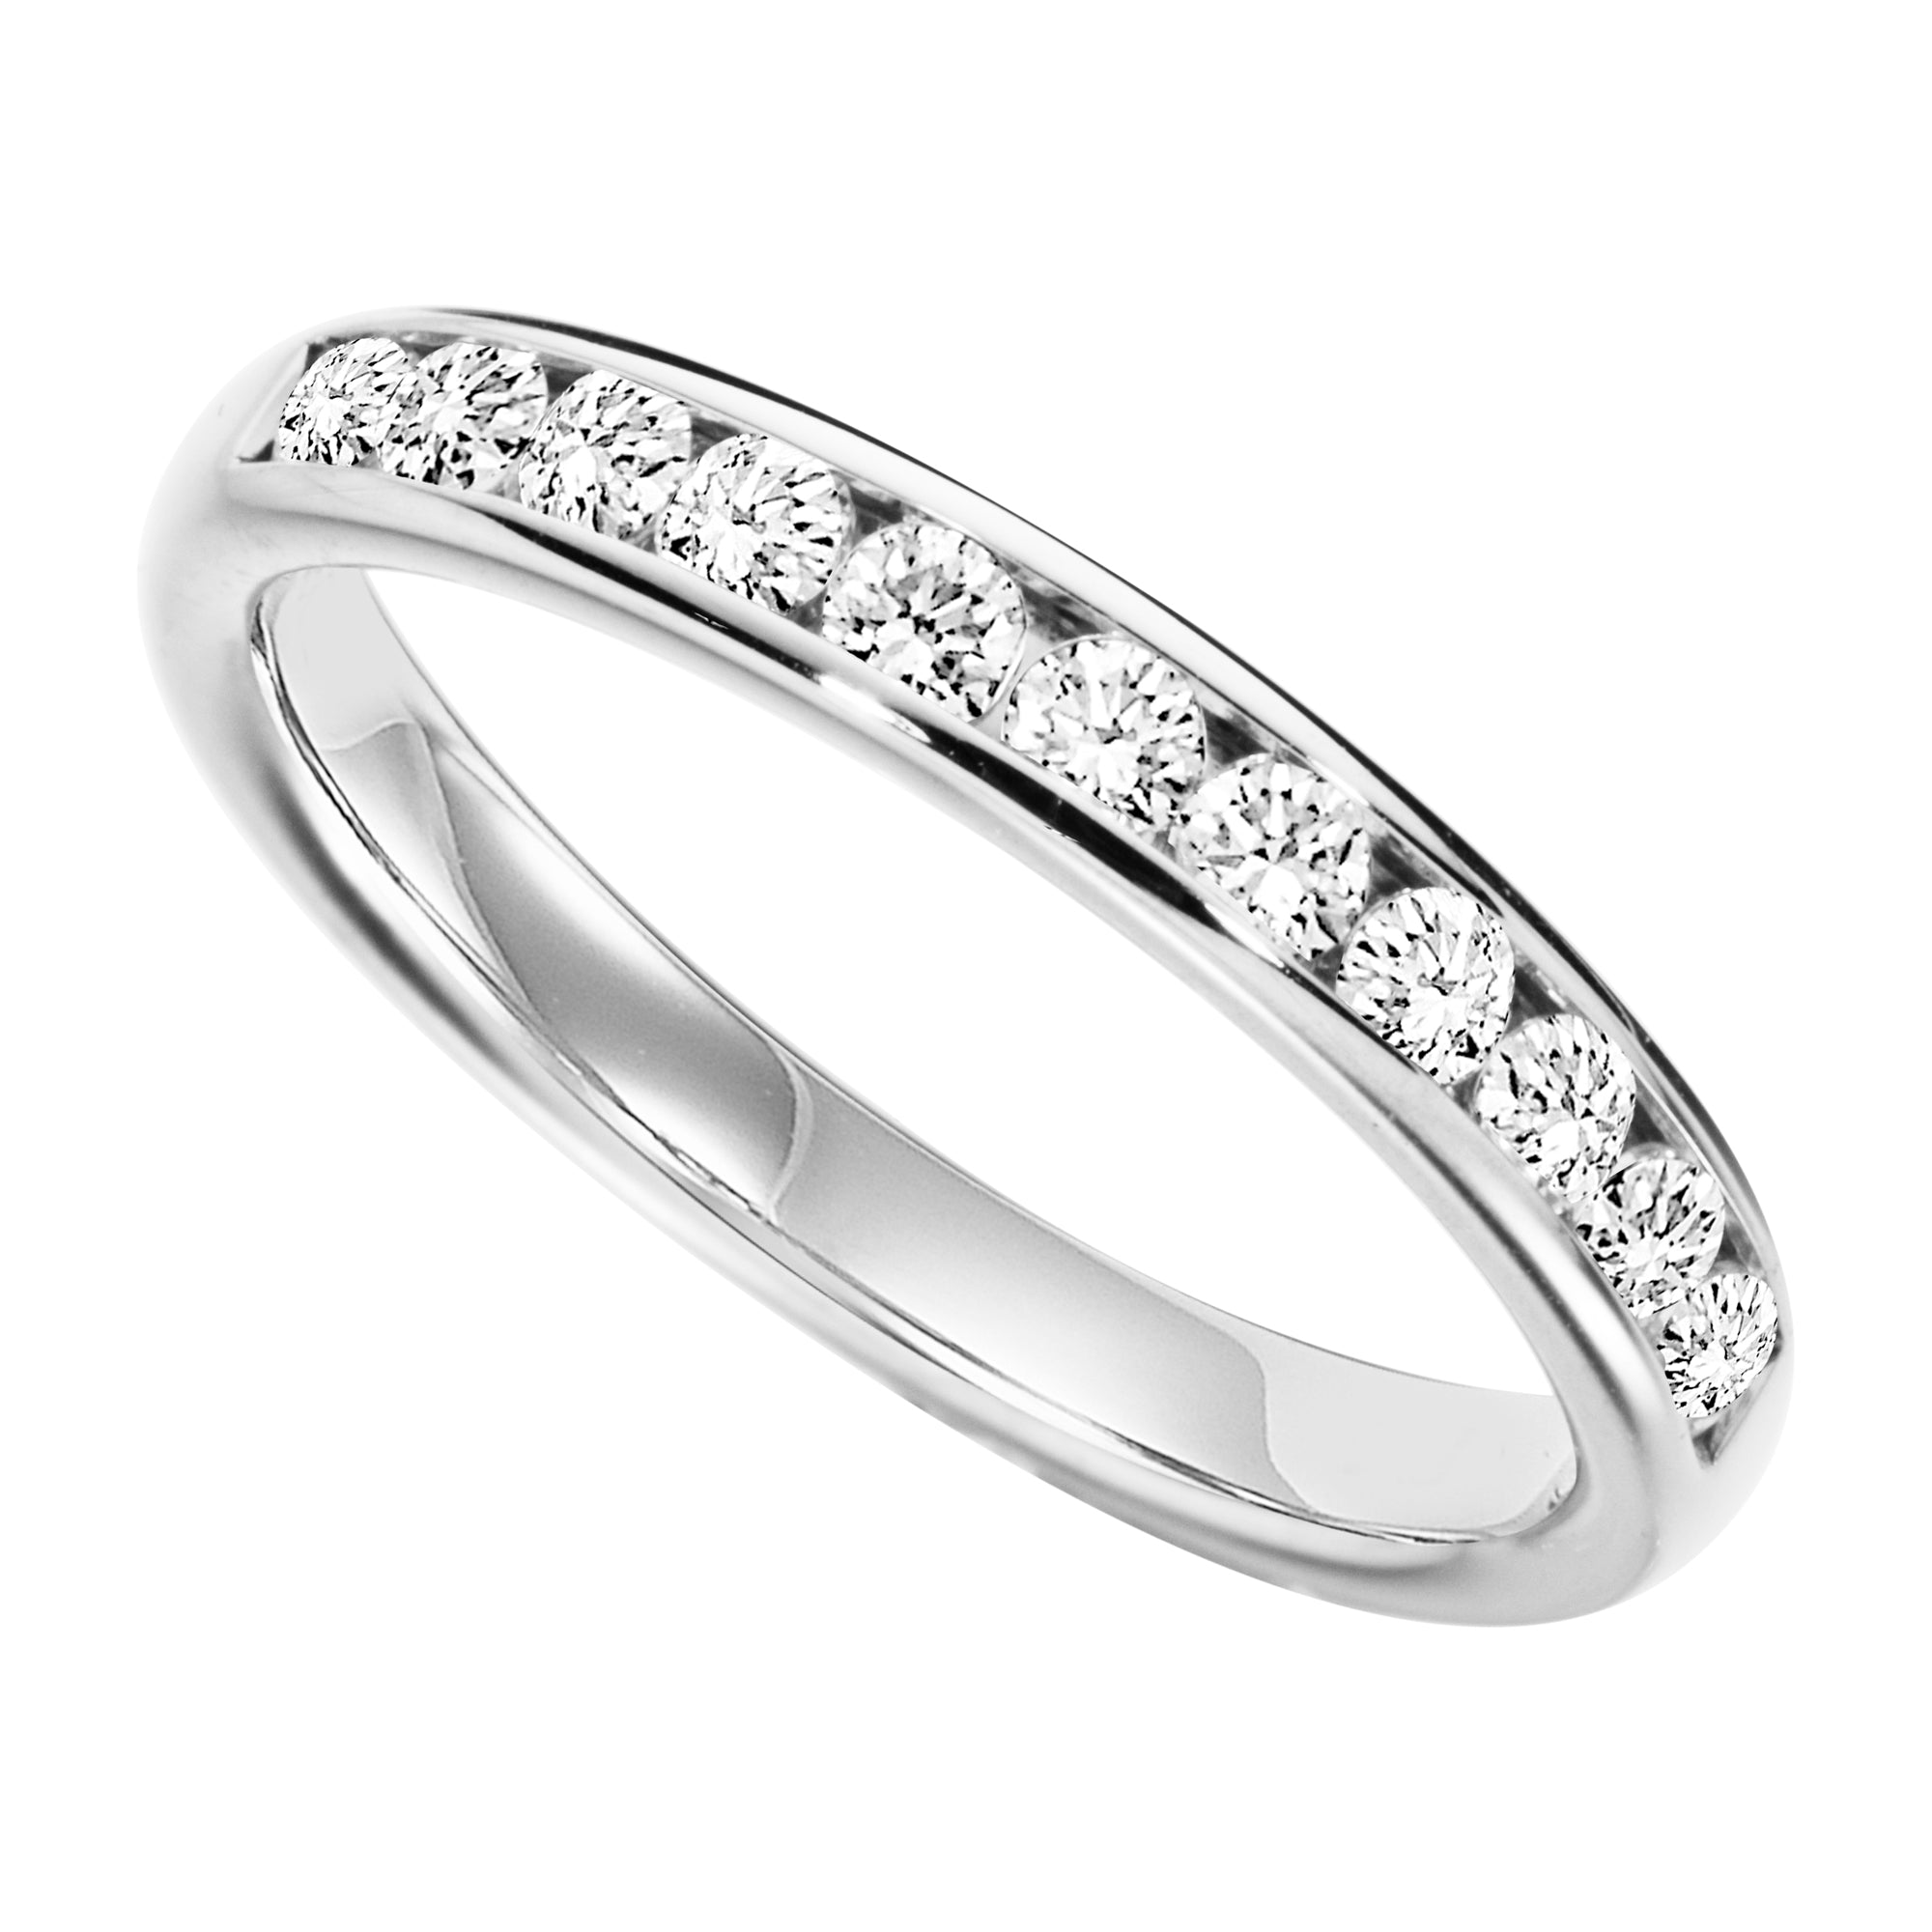 Sterling Silver Cubic Zirconia Ring - AK1010 - Hallmark Jewellers Formby & The Jewellers Bench Widnes